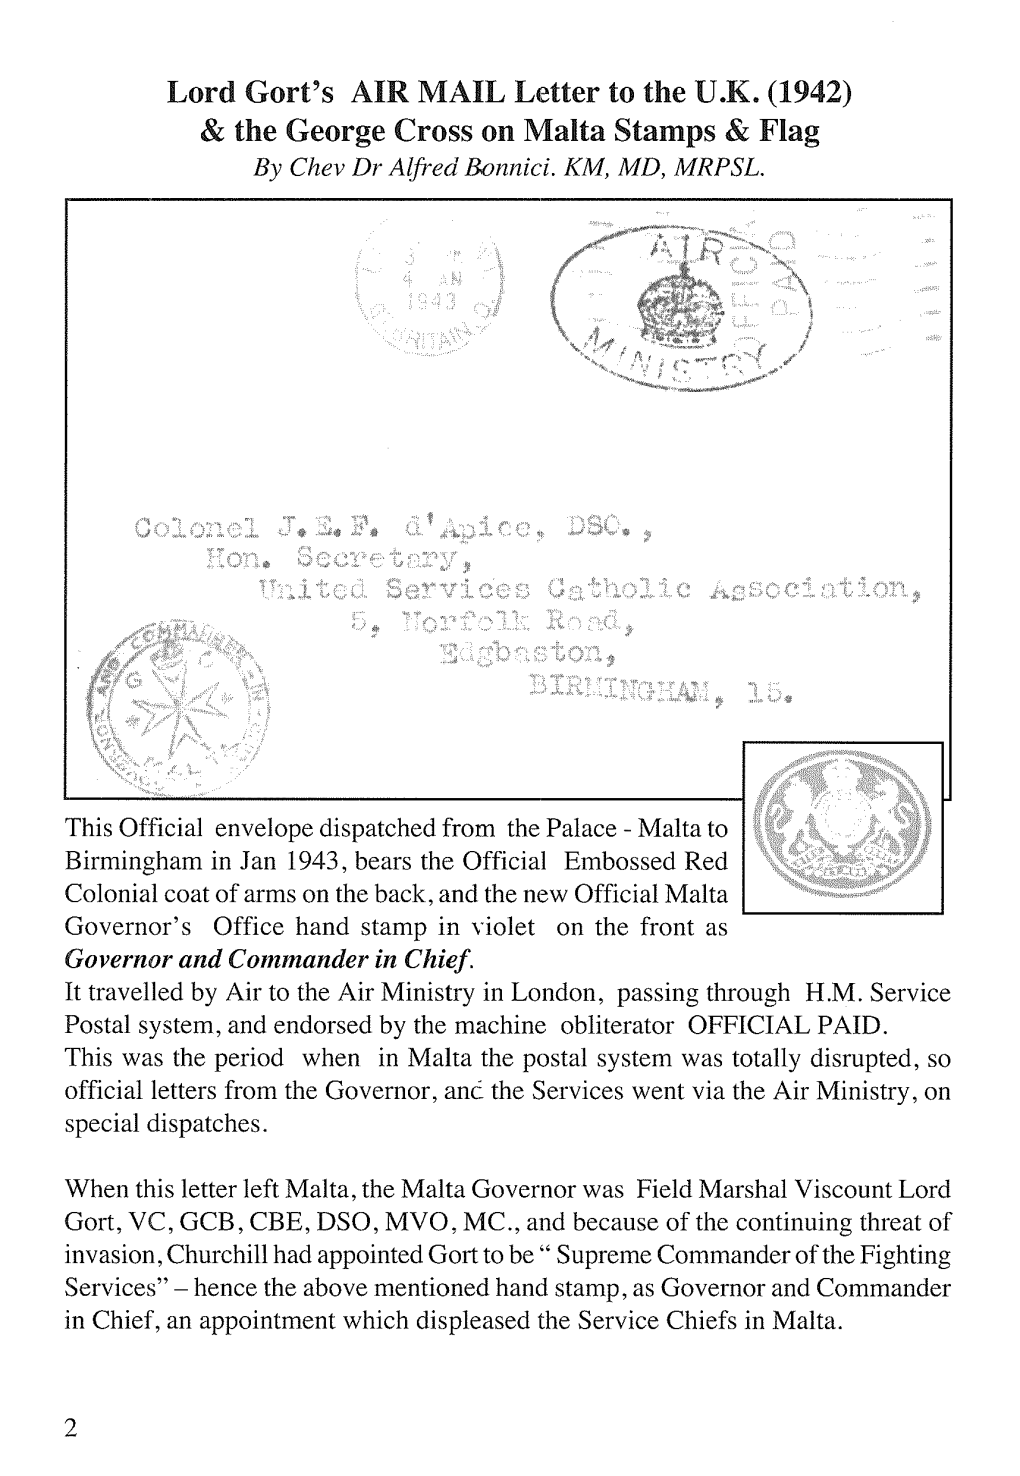 Lord Gort's AIR MAIL Letter to the U.K. (1942) & the George Cross on Malta Stamps & Flag